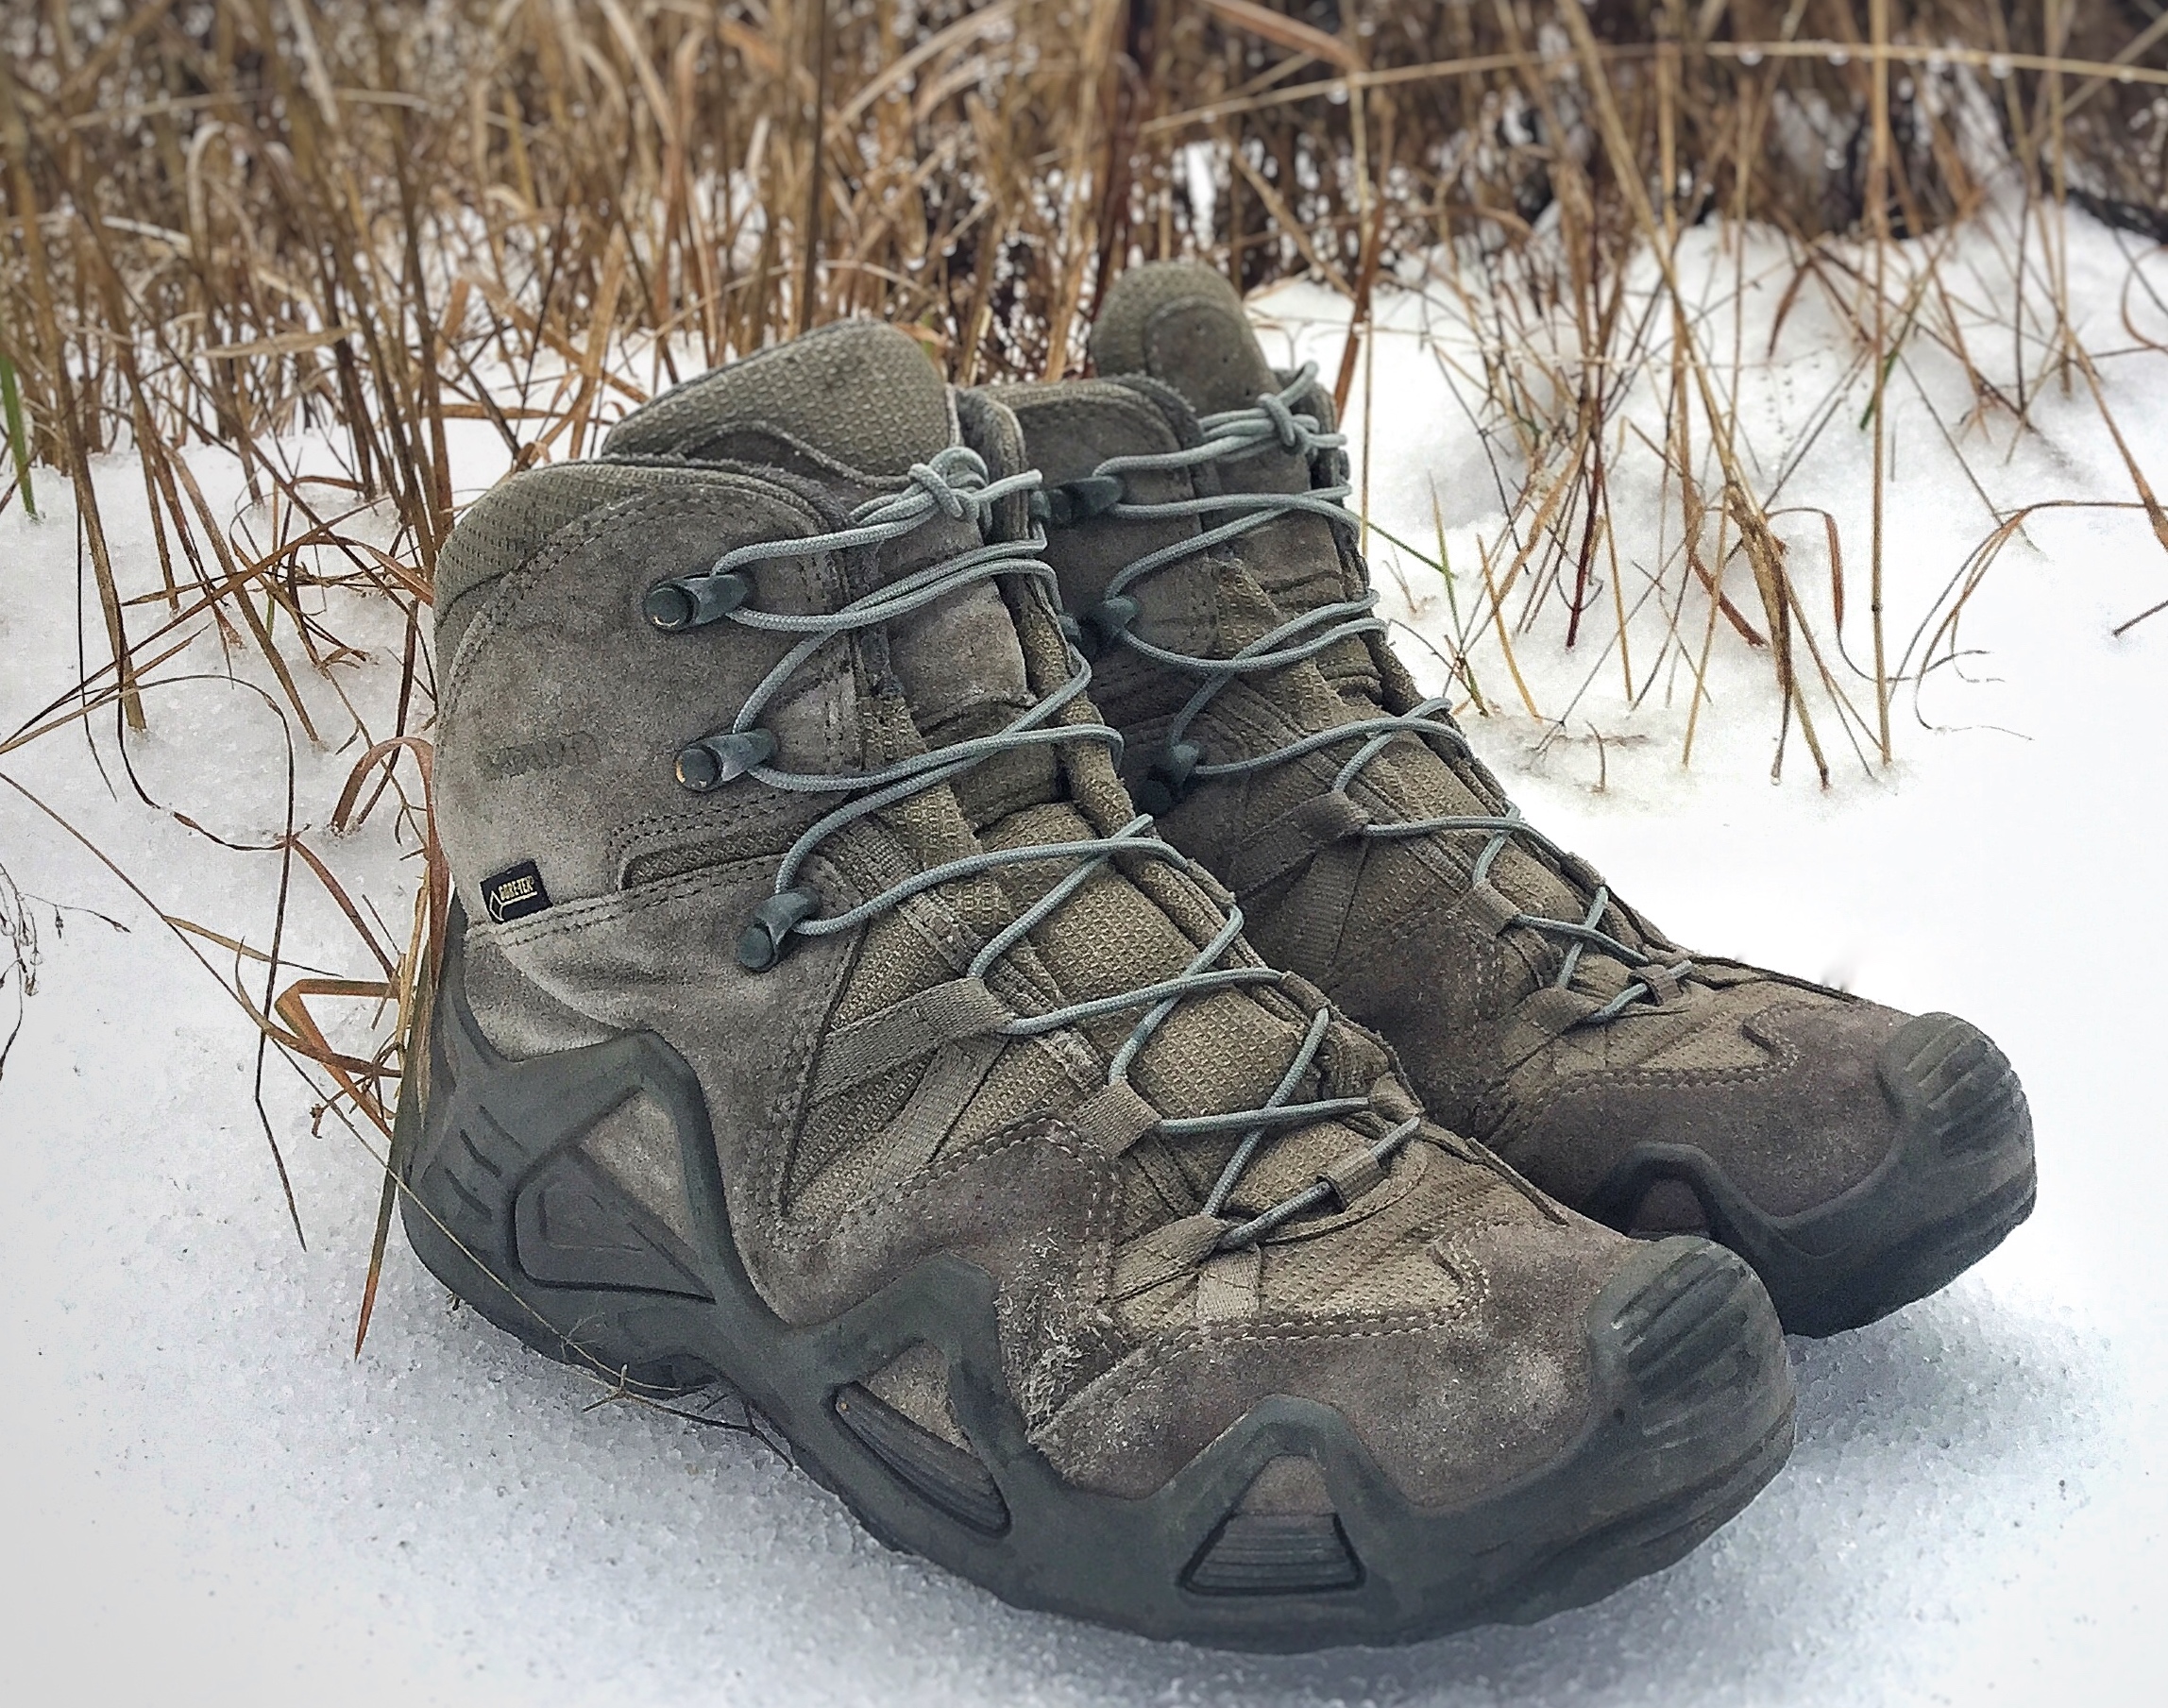 Lowa Zephyr Boots - Review After 7 Years of Use | OutdoorHub